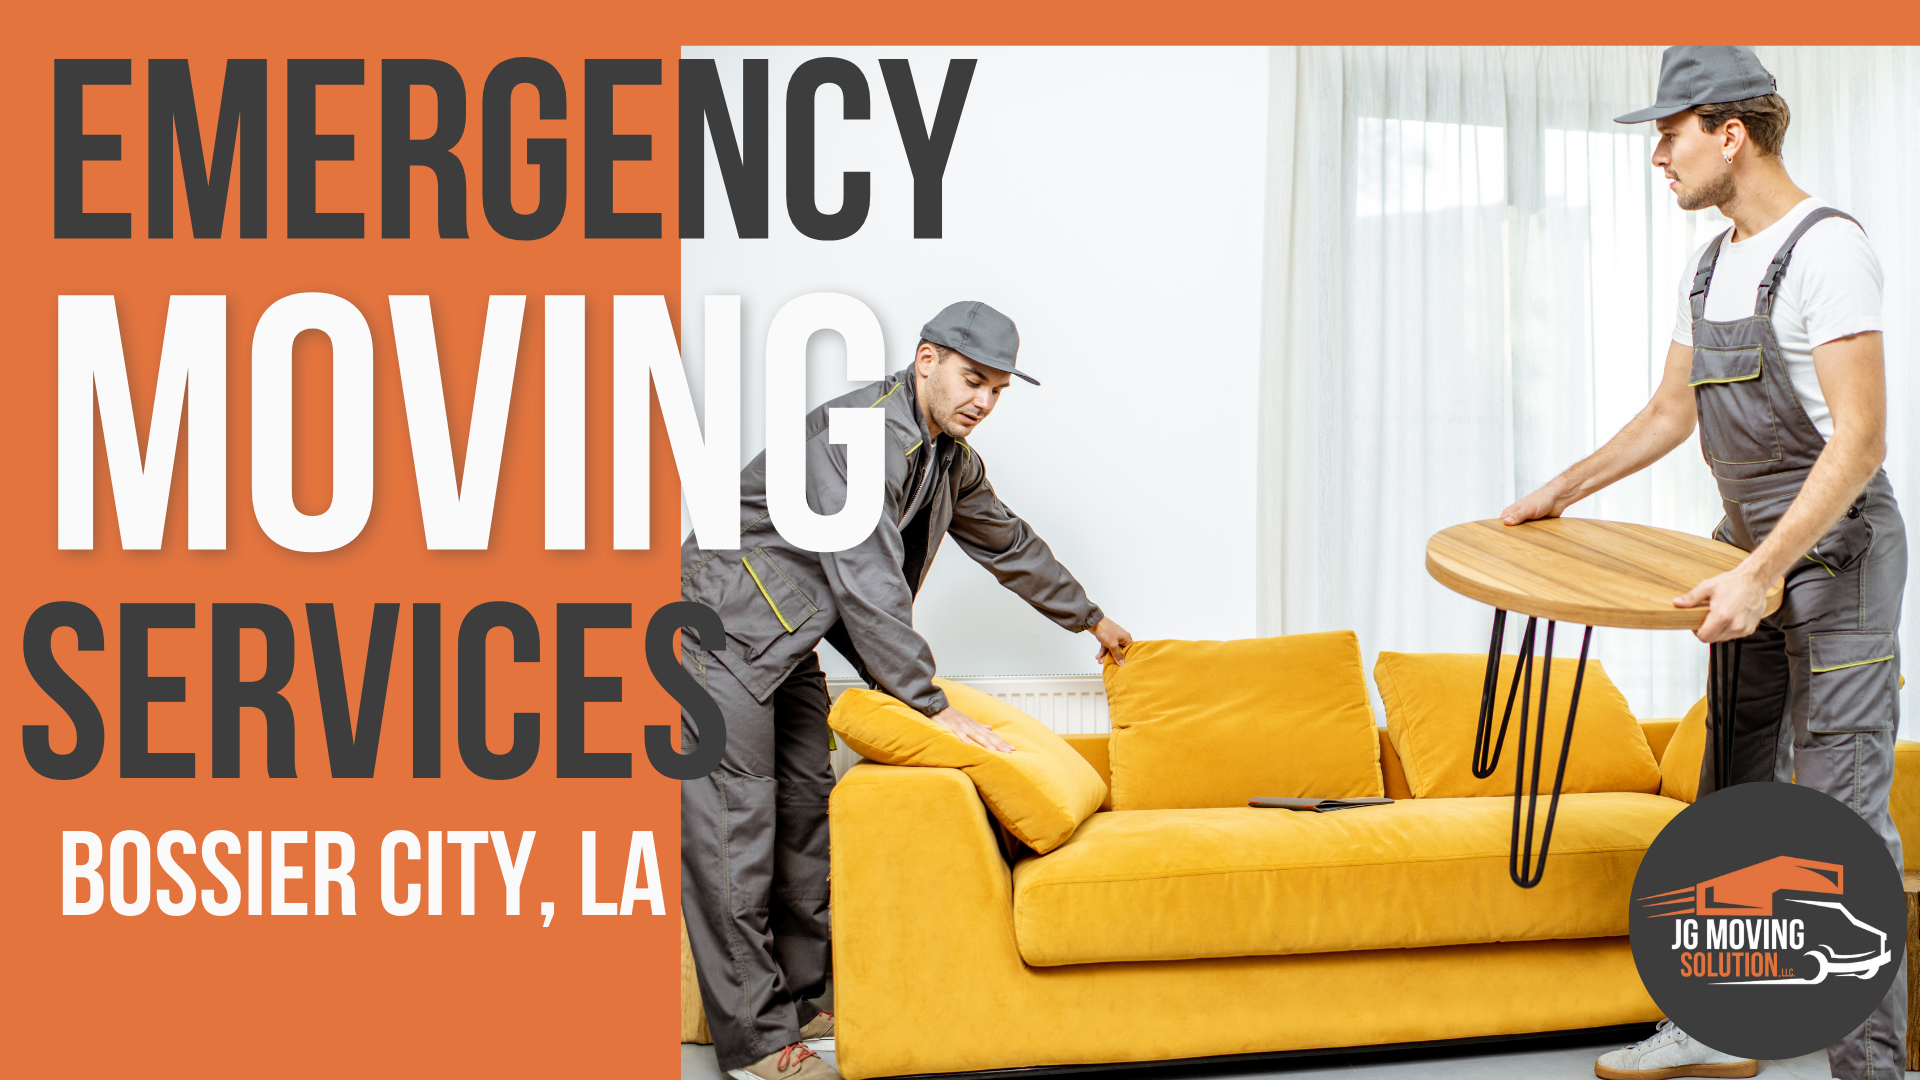 Emergency Moving Services In Bossier City - JG Moving Solution Two Movers Moving a Sofa